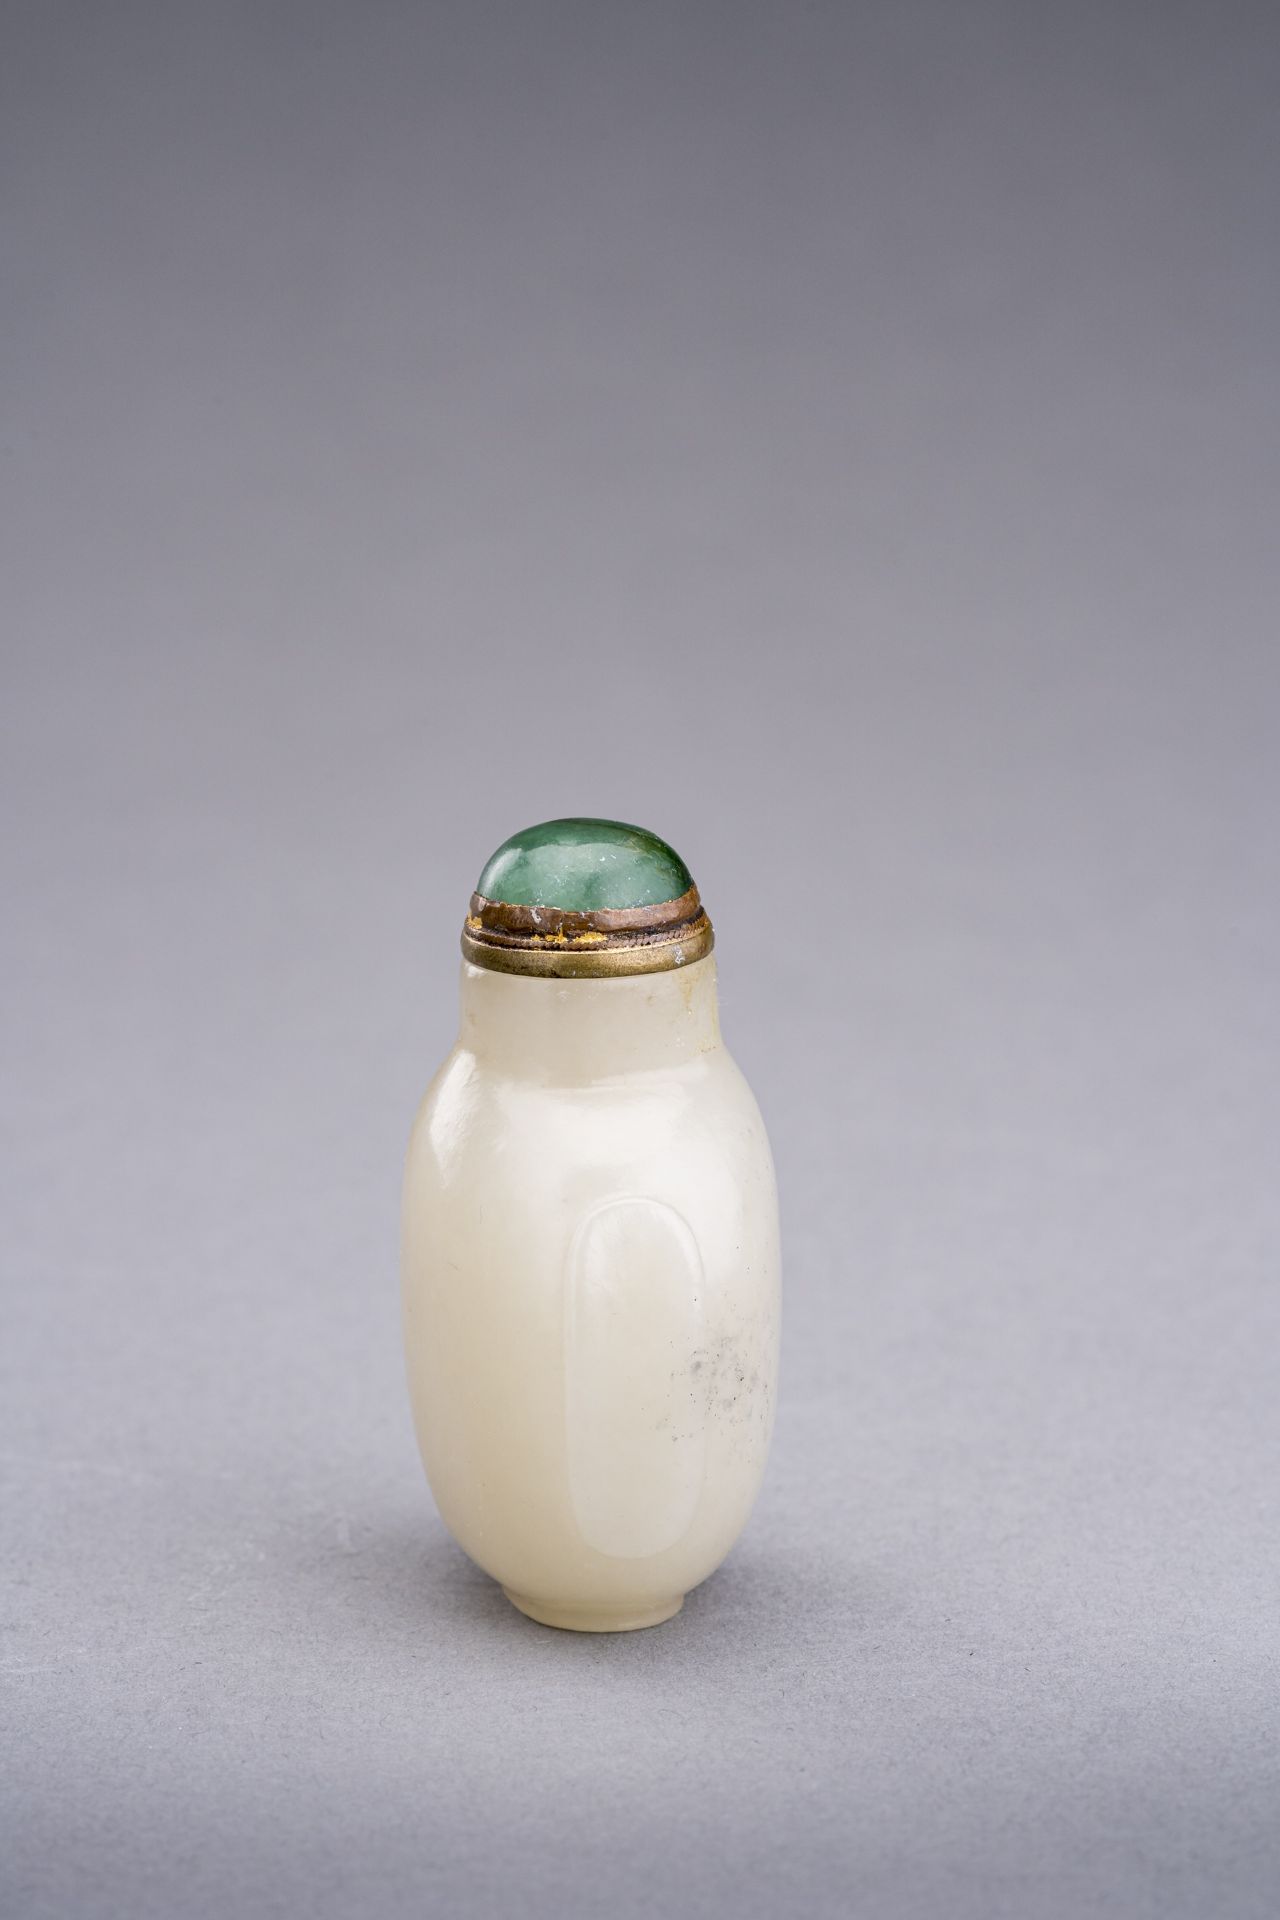 A CELADON JADE SNUFF BOTTLE, QING DYNASTY - Image 2 of 6